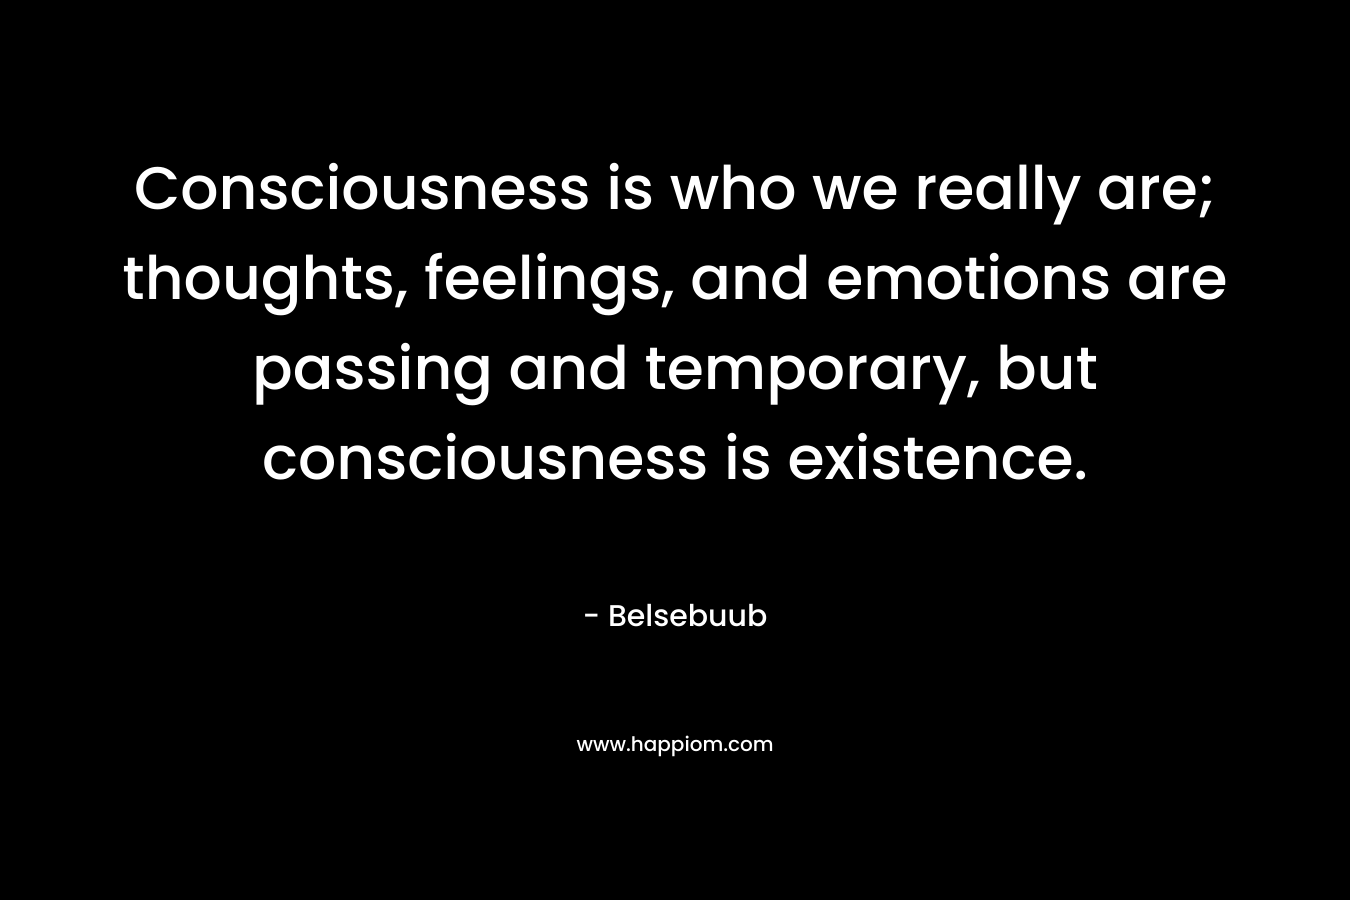 Consciousness is who we really are; thoughts, feelings, and emotions are passing and temporary, but consciousness is existence.